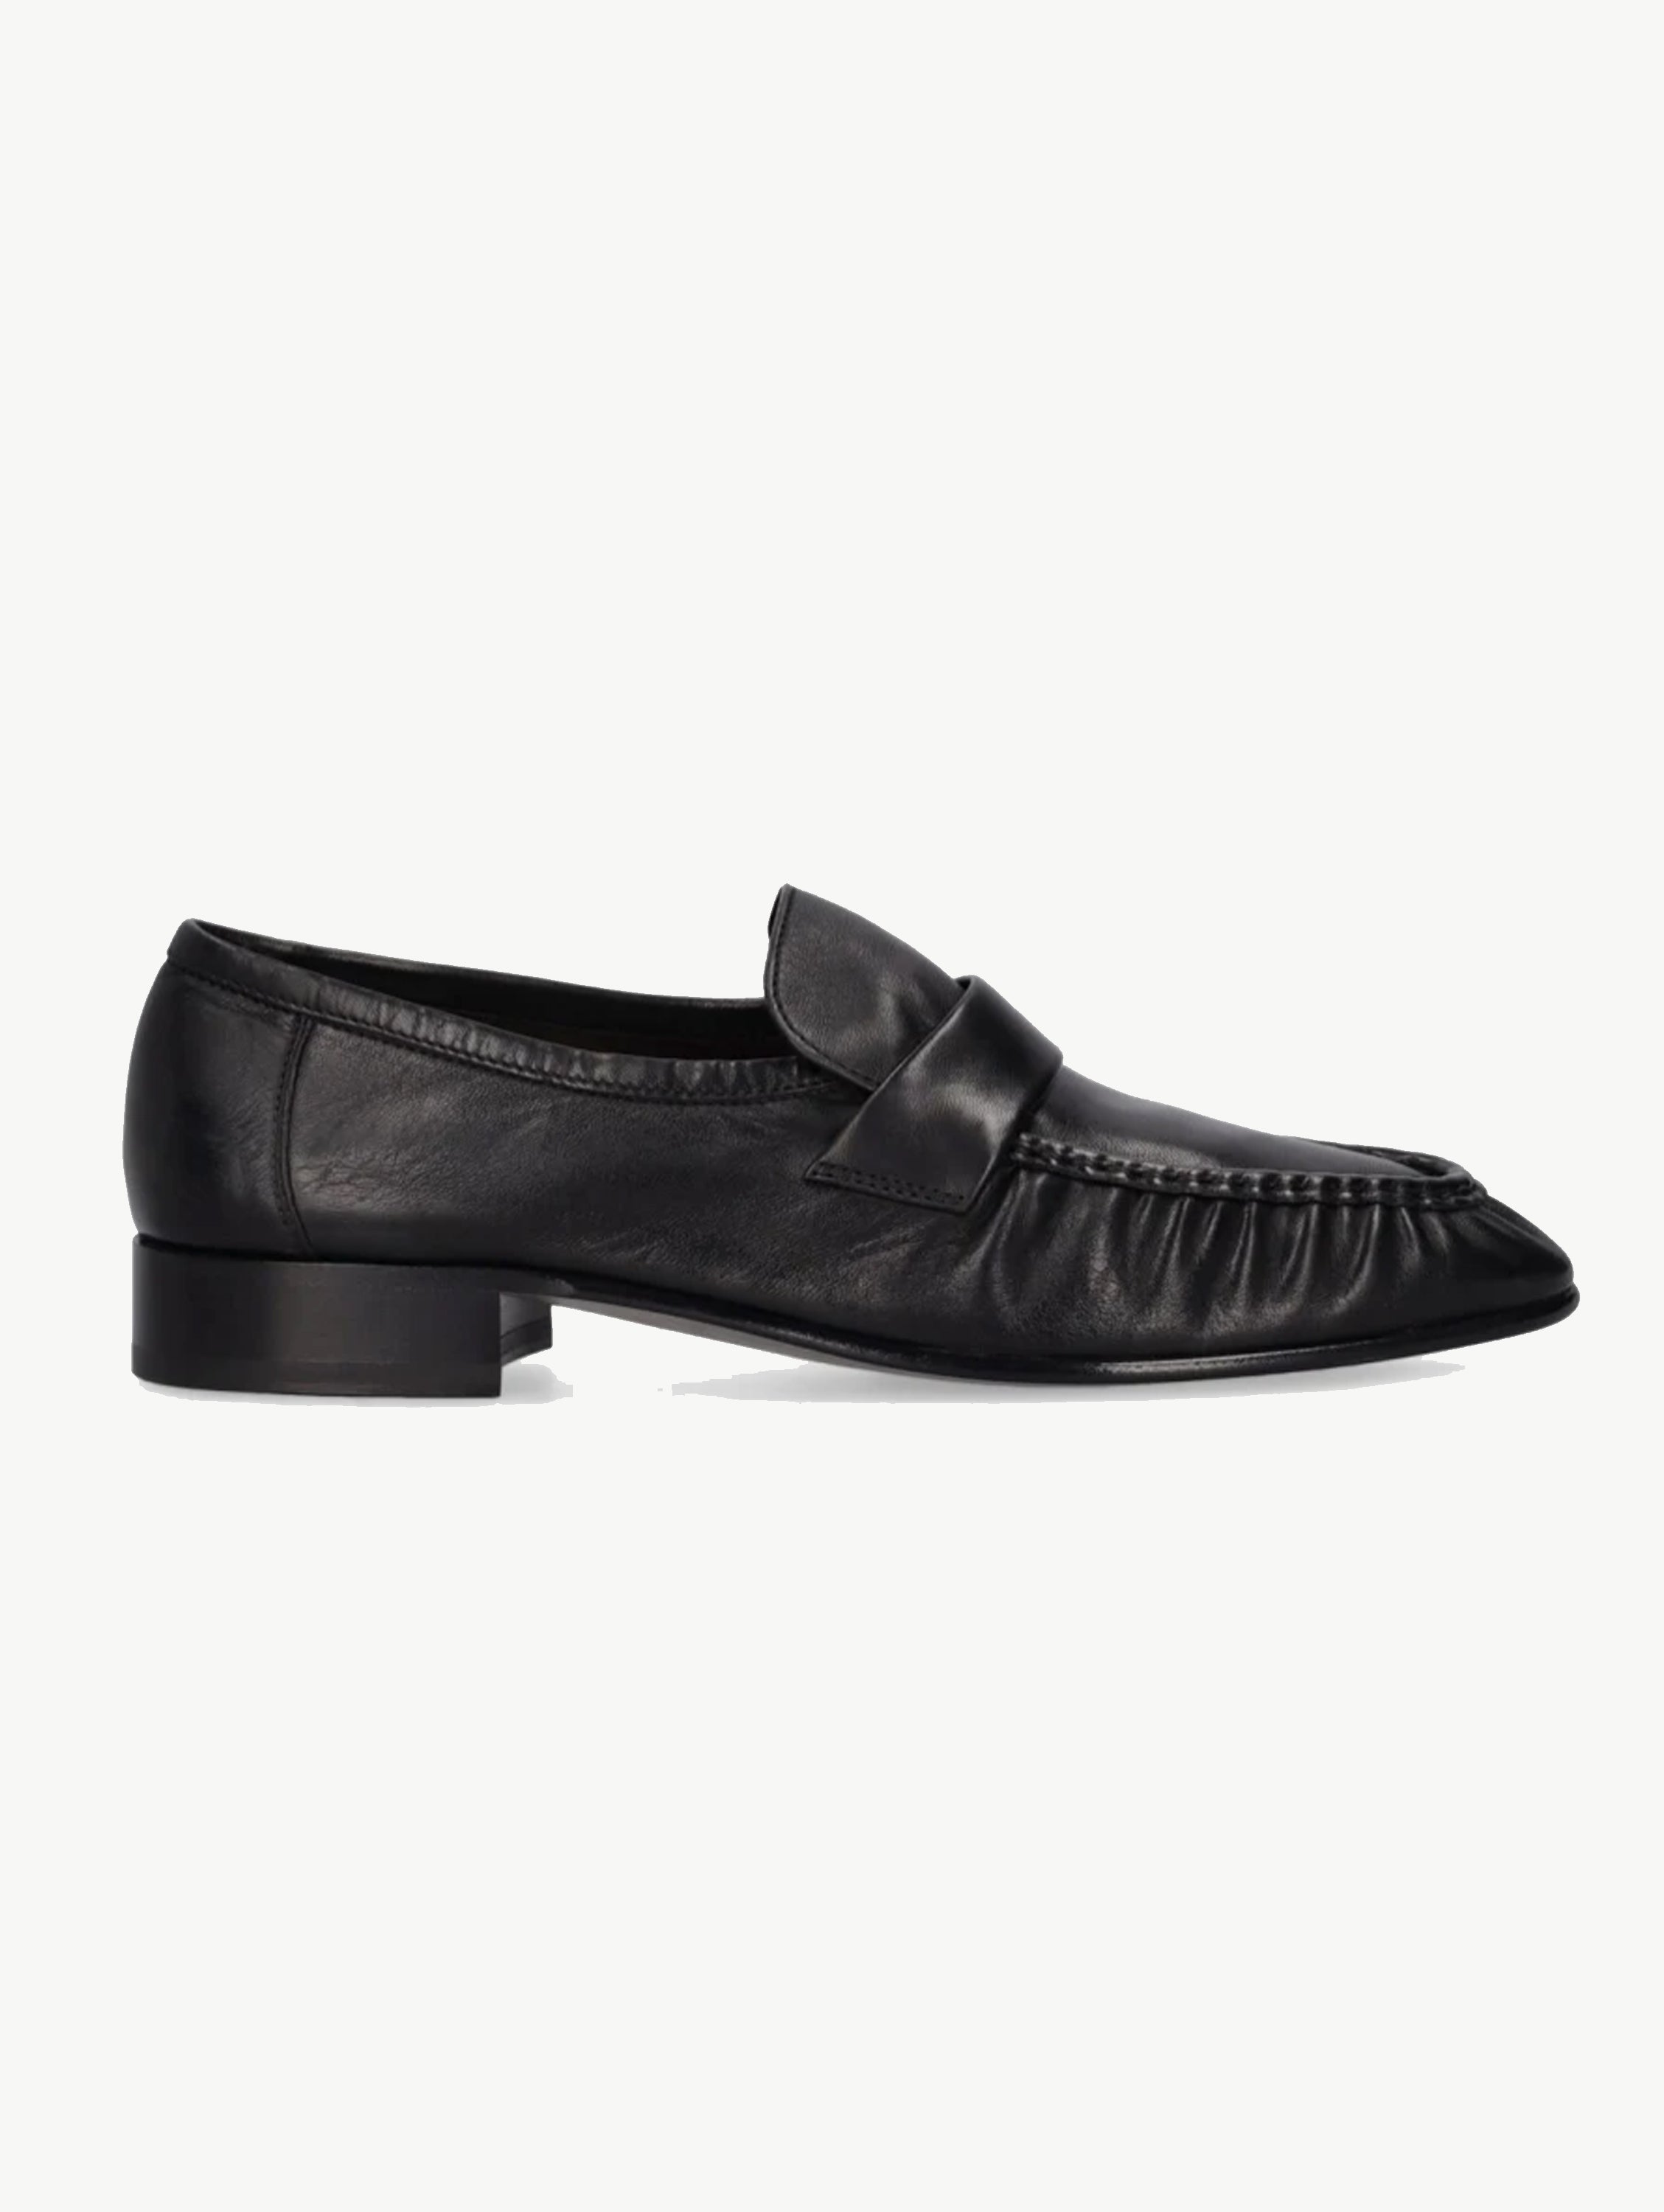 Soft leather loafers